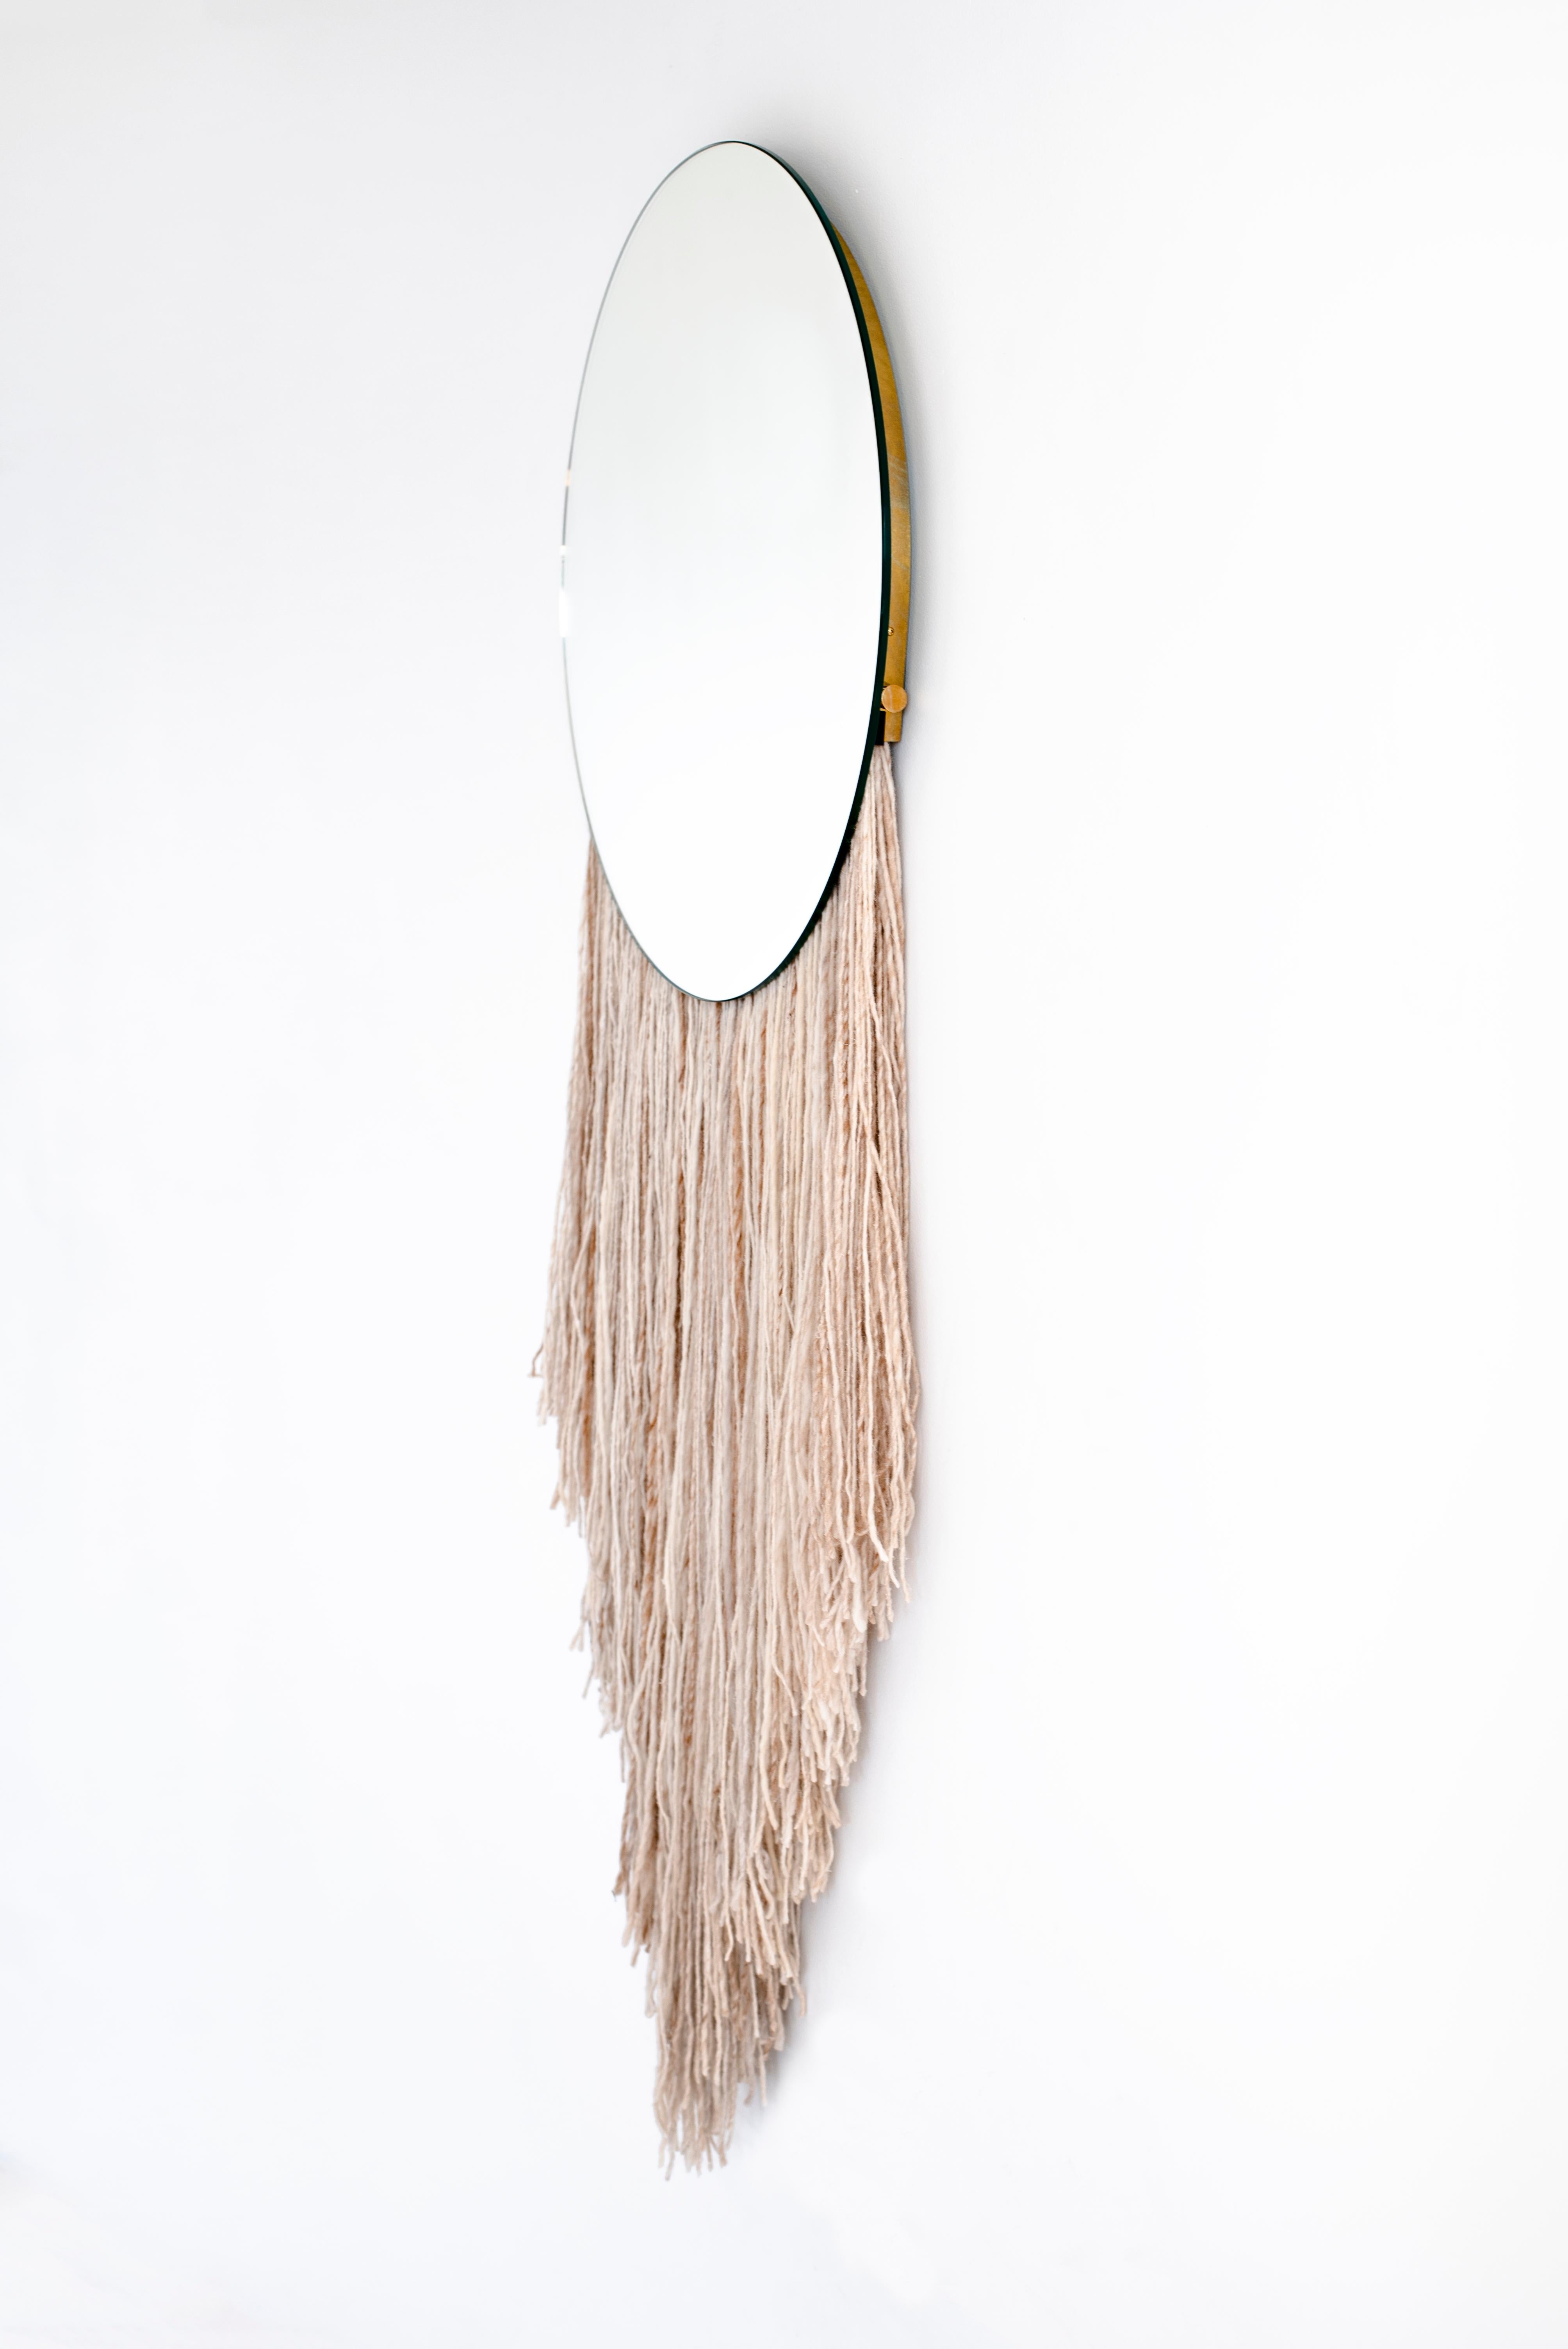 American Round Clear Mirror with Fiber - Contemporary Eos Mirror by Ben & Aja Blanc For Sale